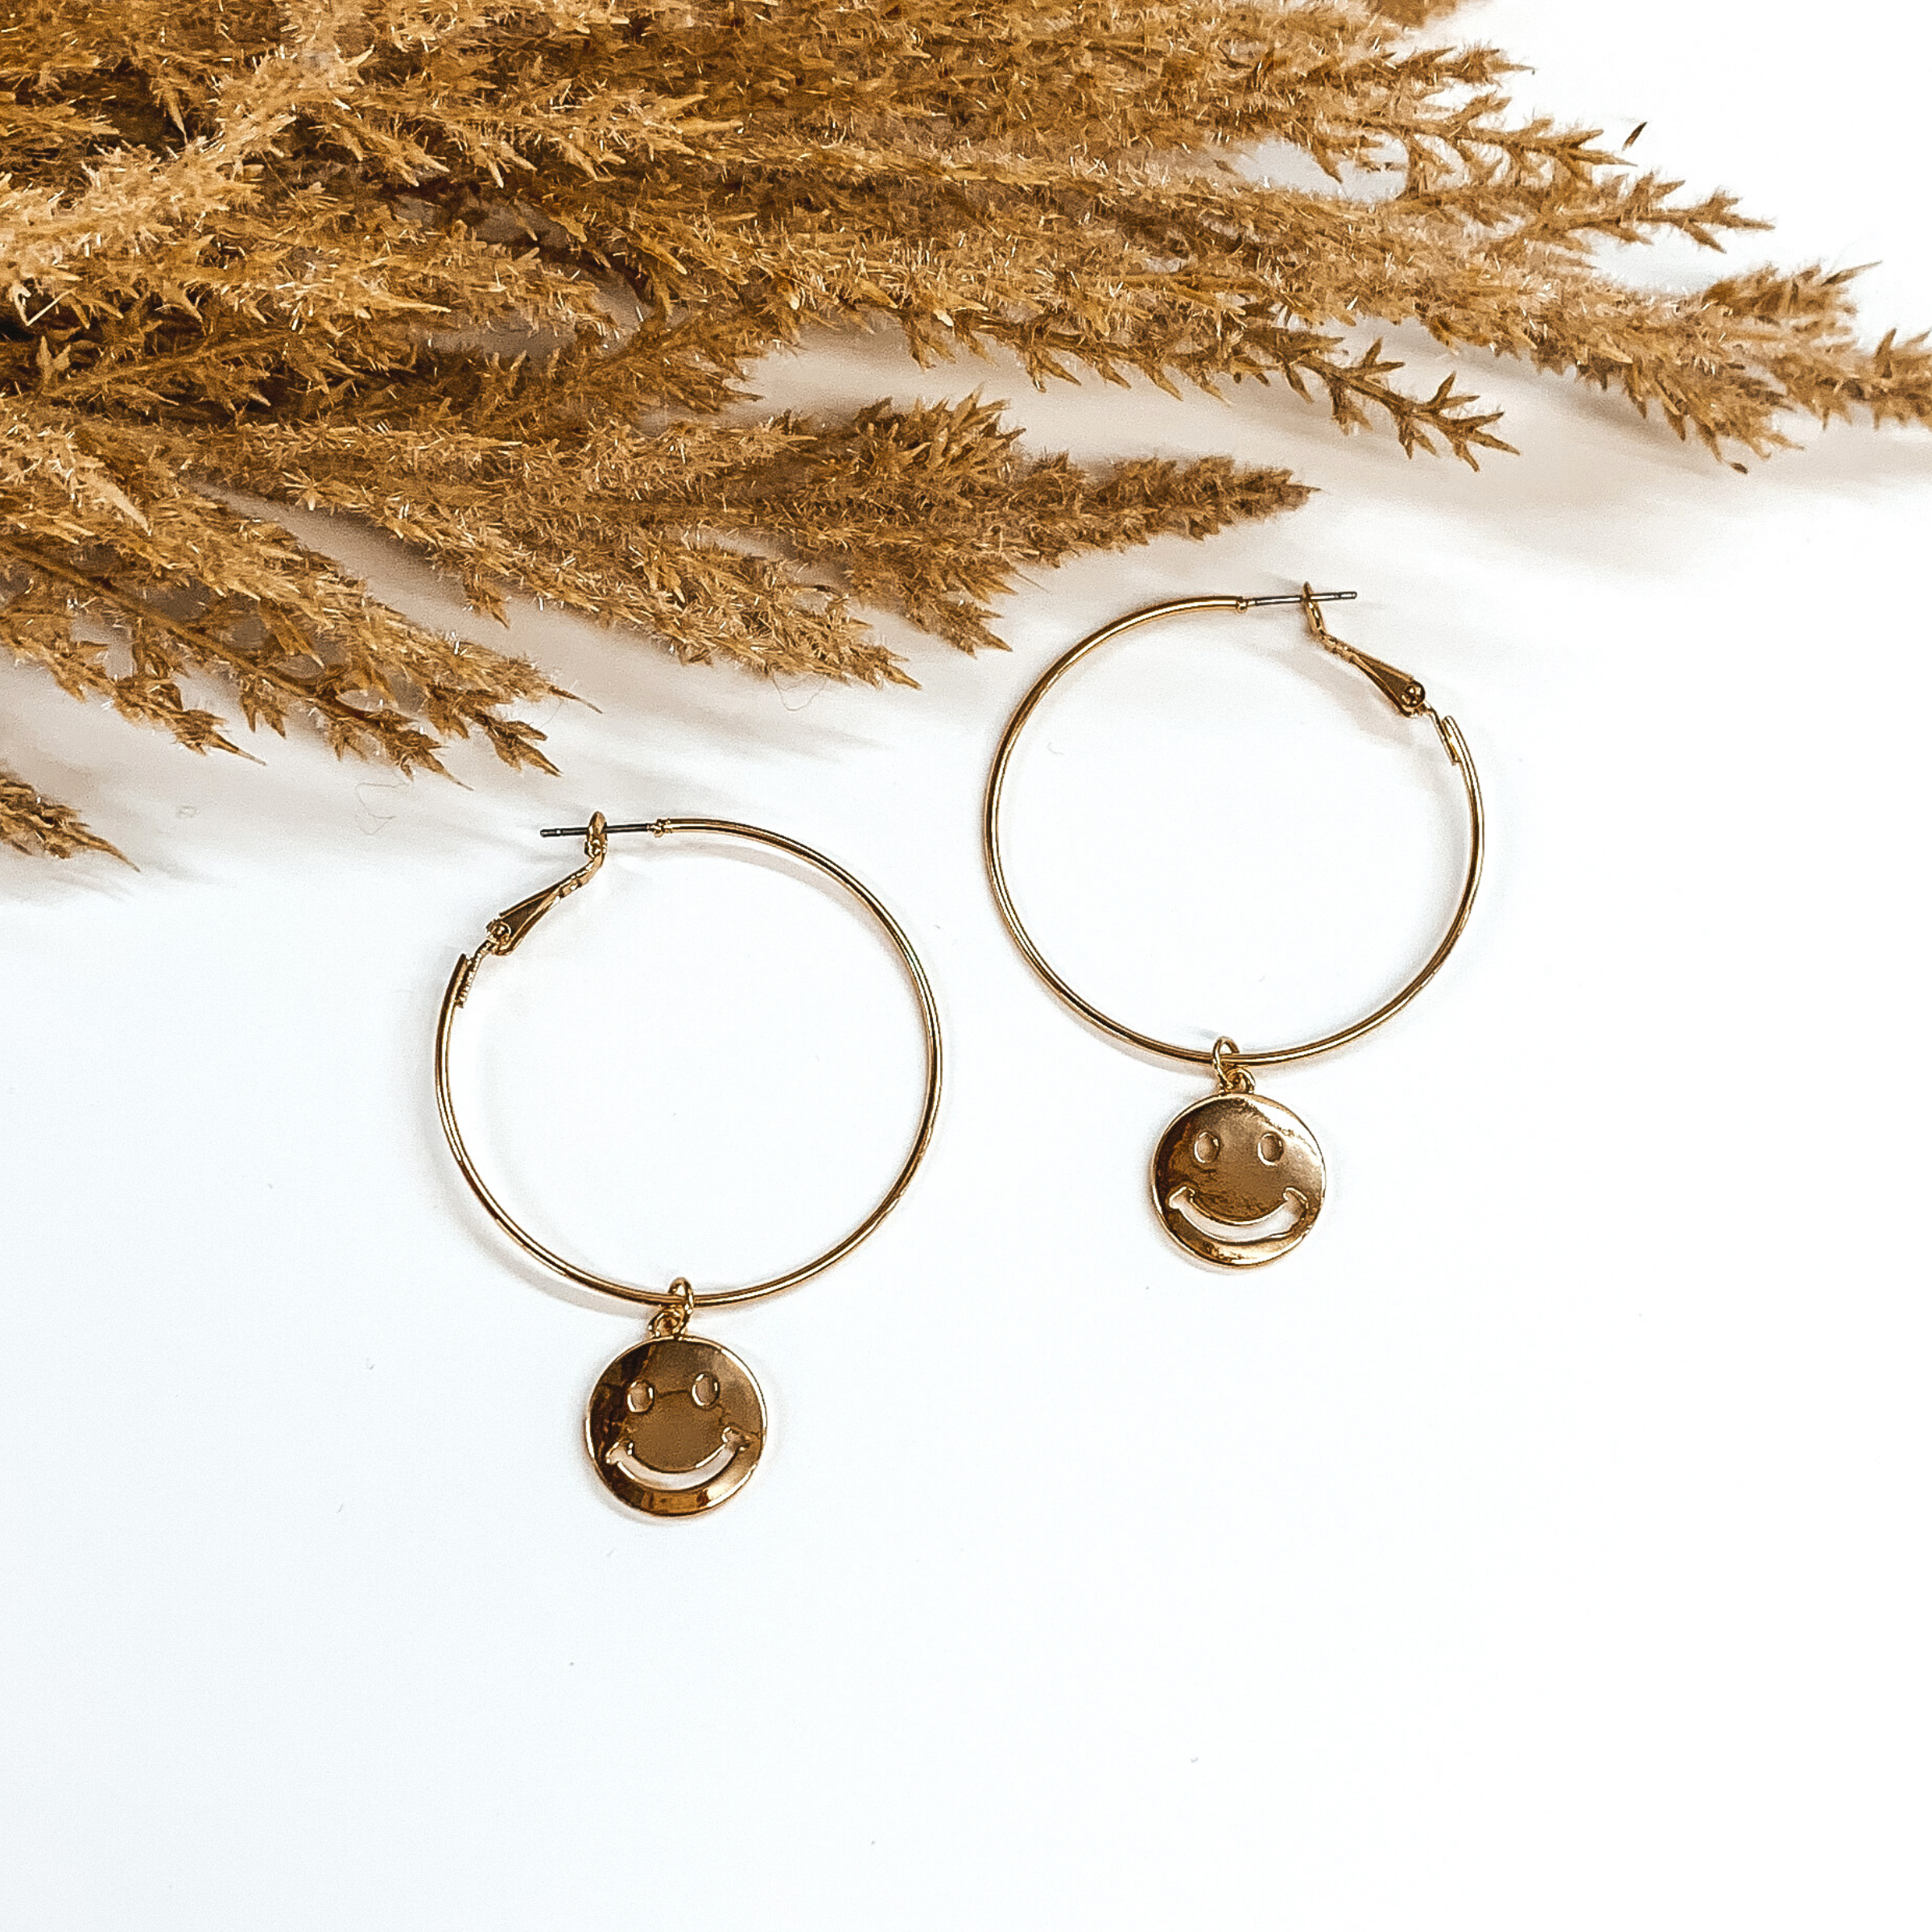 Turn That Frown Upside Down Large Hoop Earrings in Gold - Giddy Up Glamour Boutique